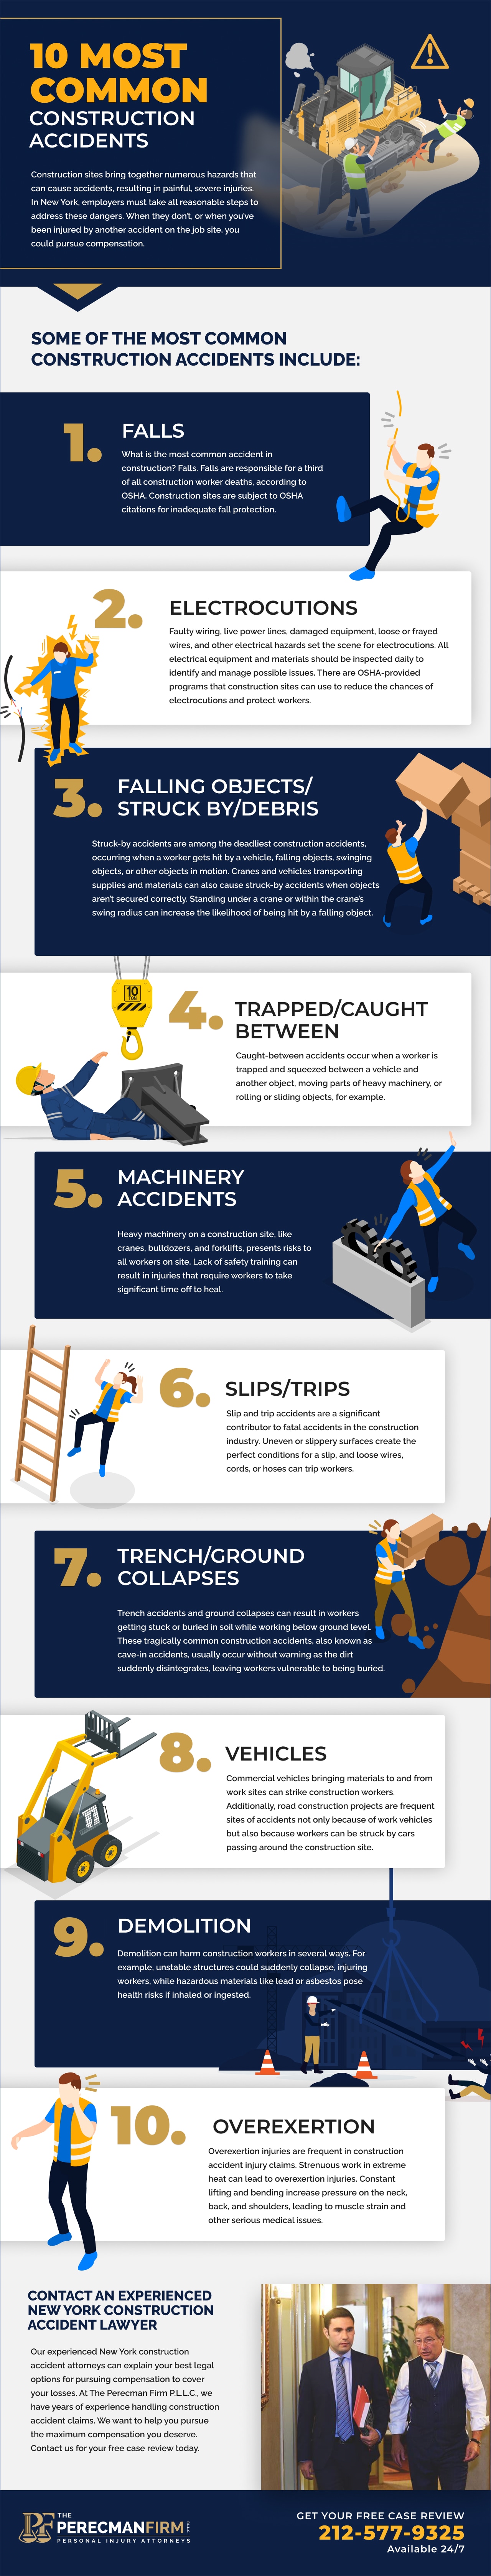 10 Most Common Construction Accidents